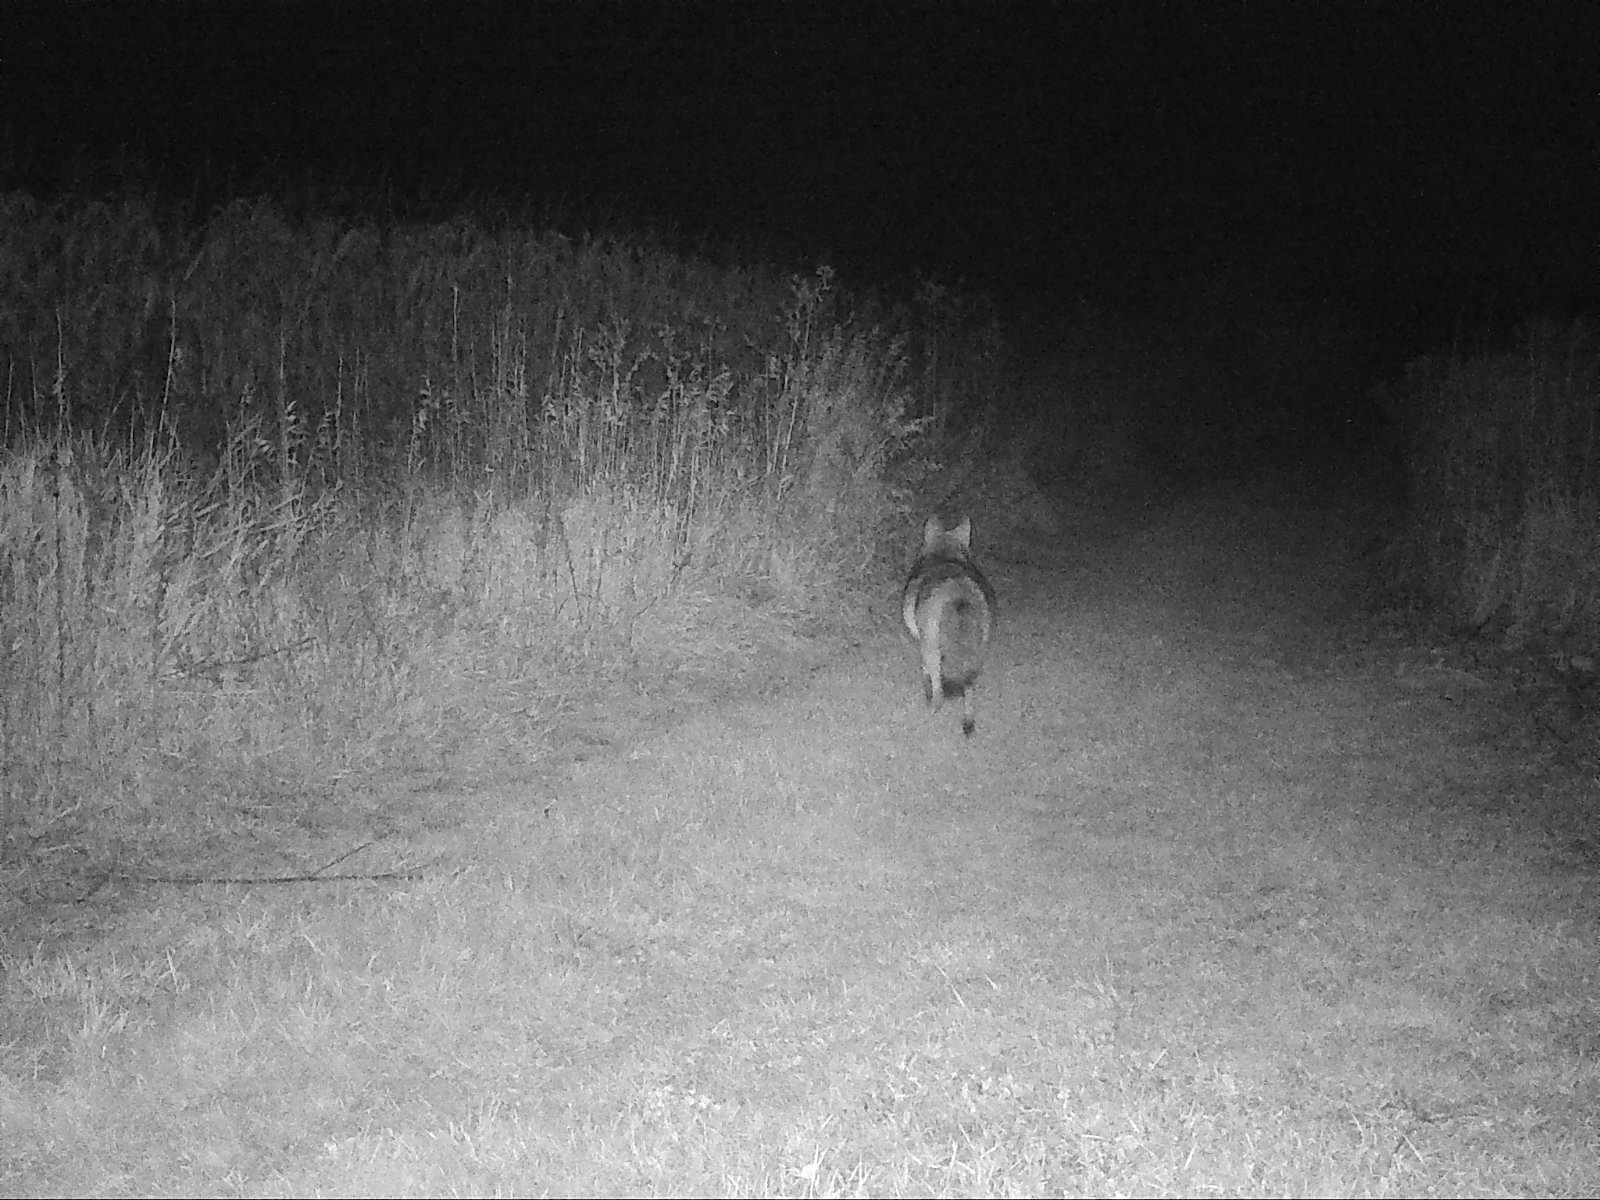  A well-fed coyote on the hunt at 6:18 am on October 19, 2017 